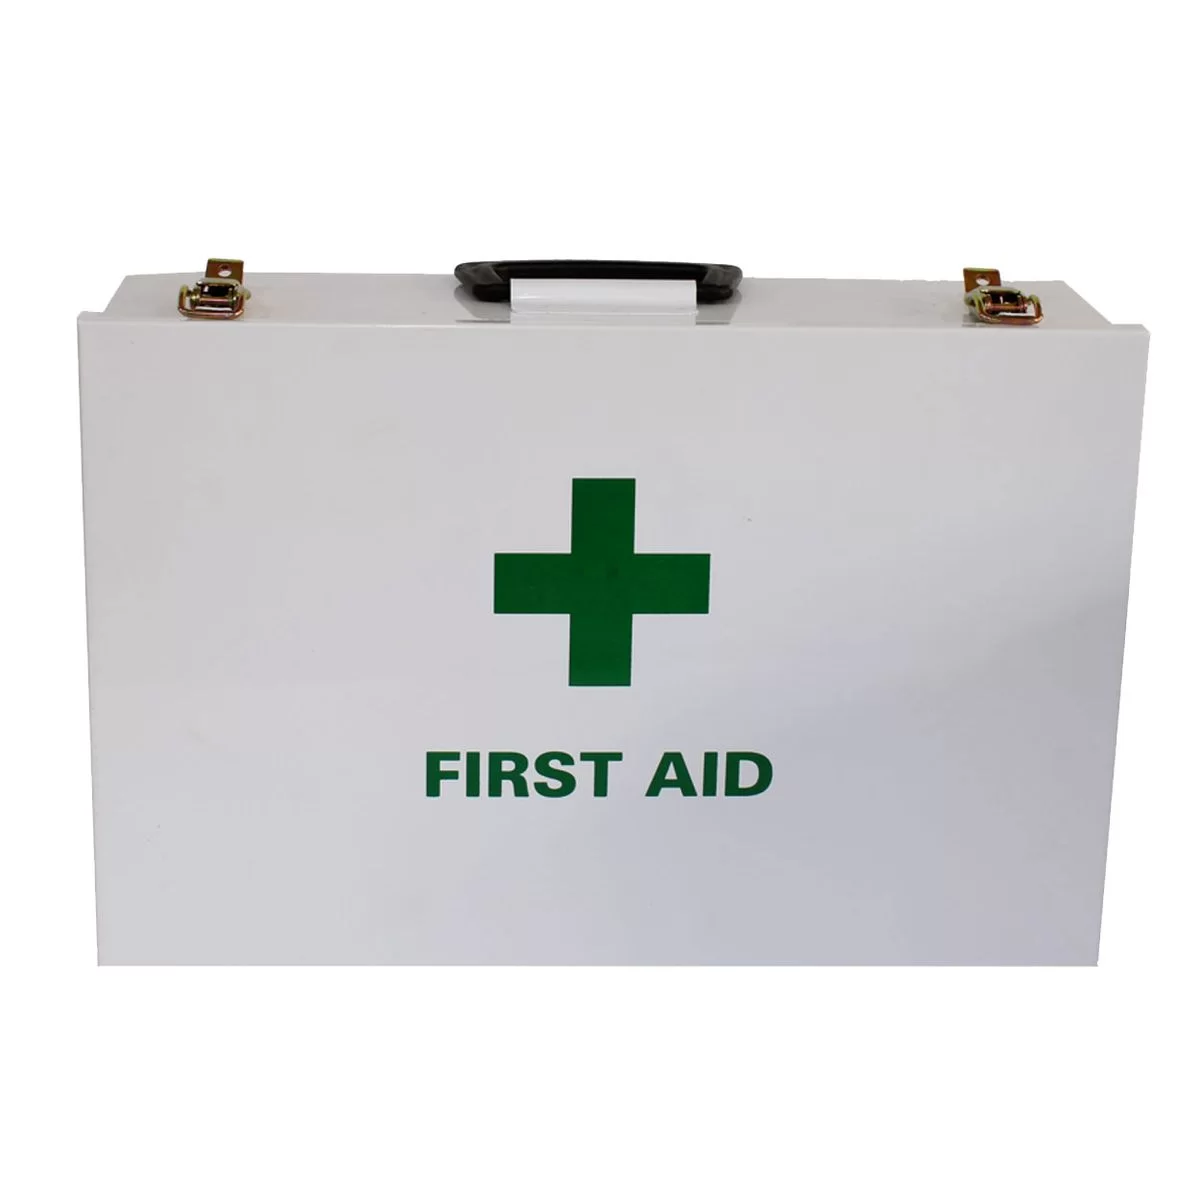 Empty Metal Box for First Aid